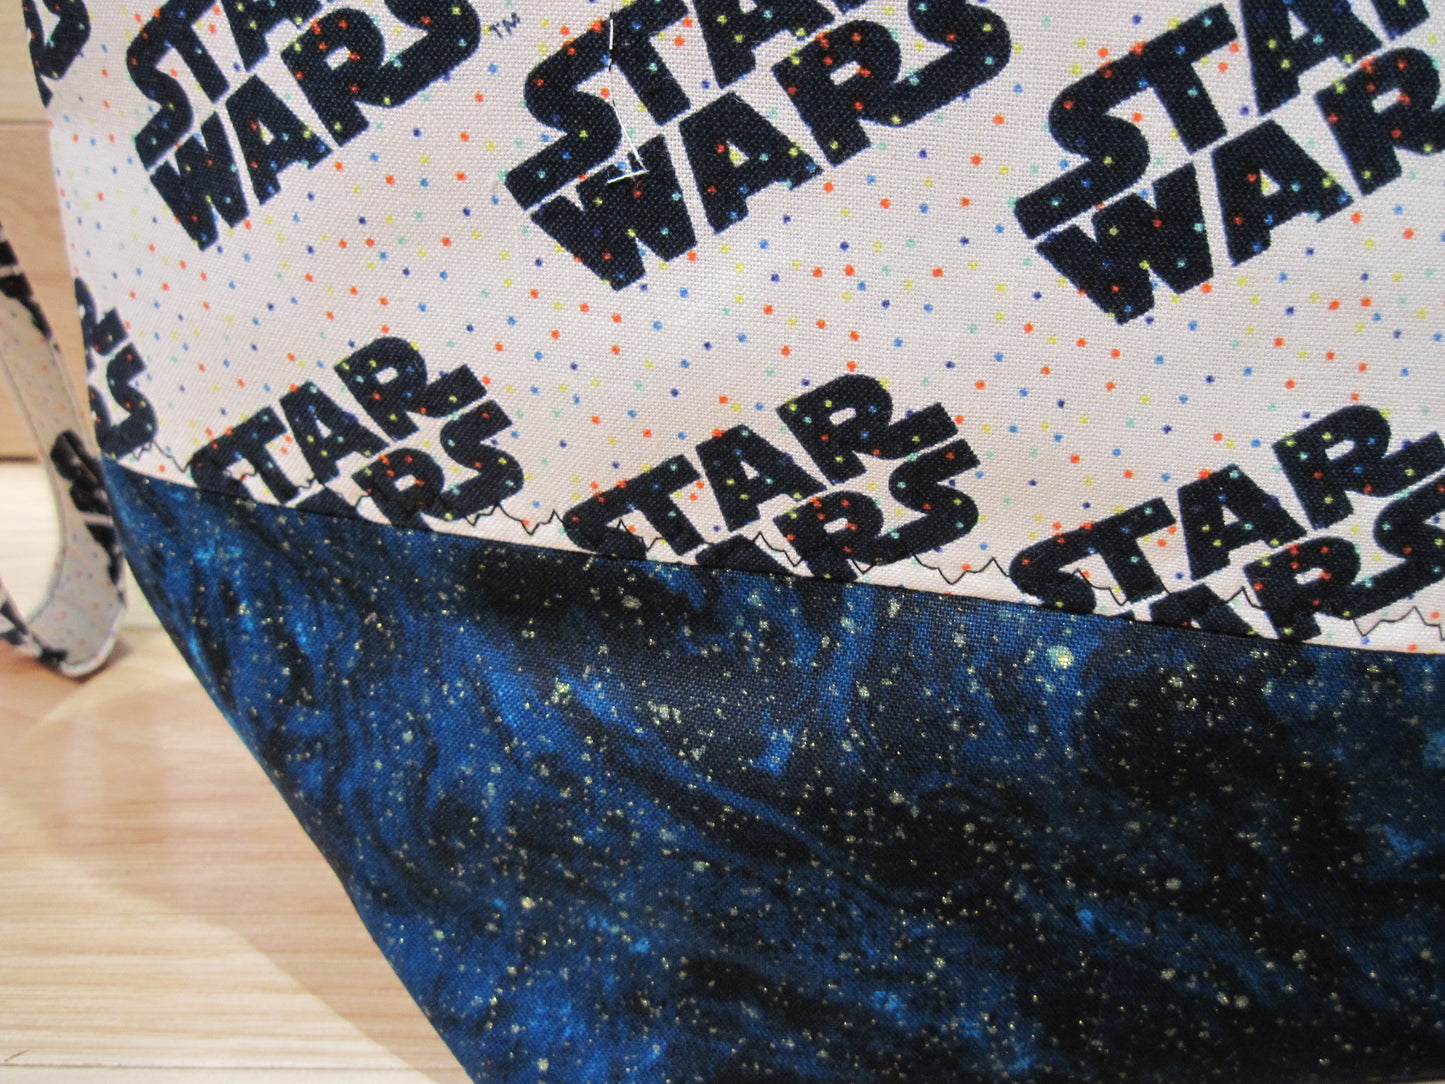 X-Large Star Wars w/ blue swirl sparkles, snaps & removable handles project bag